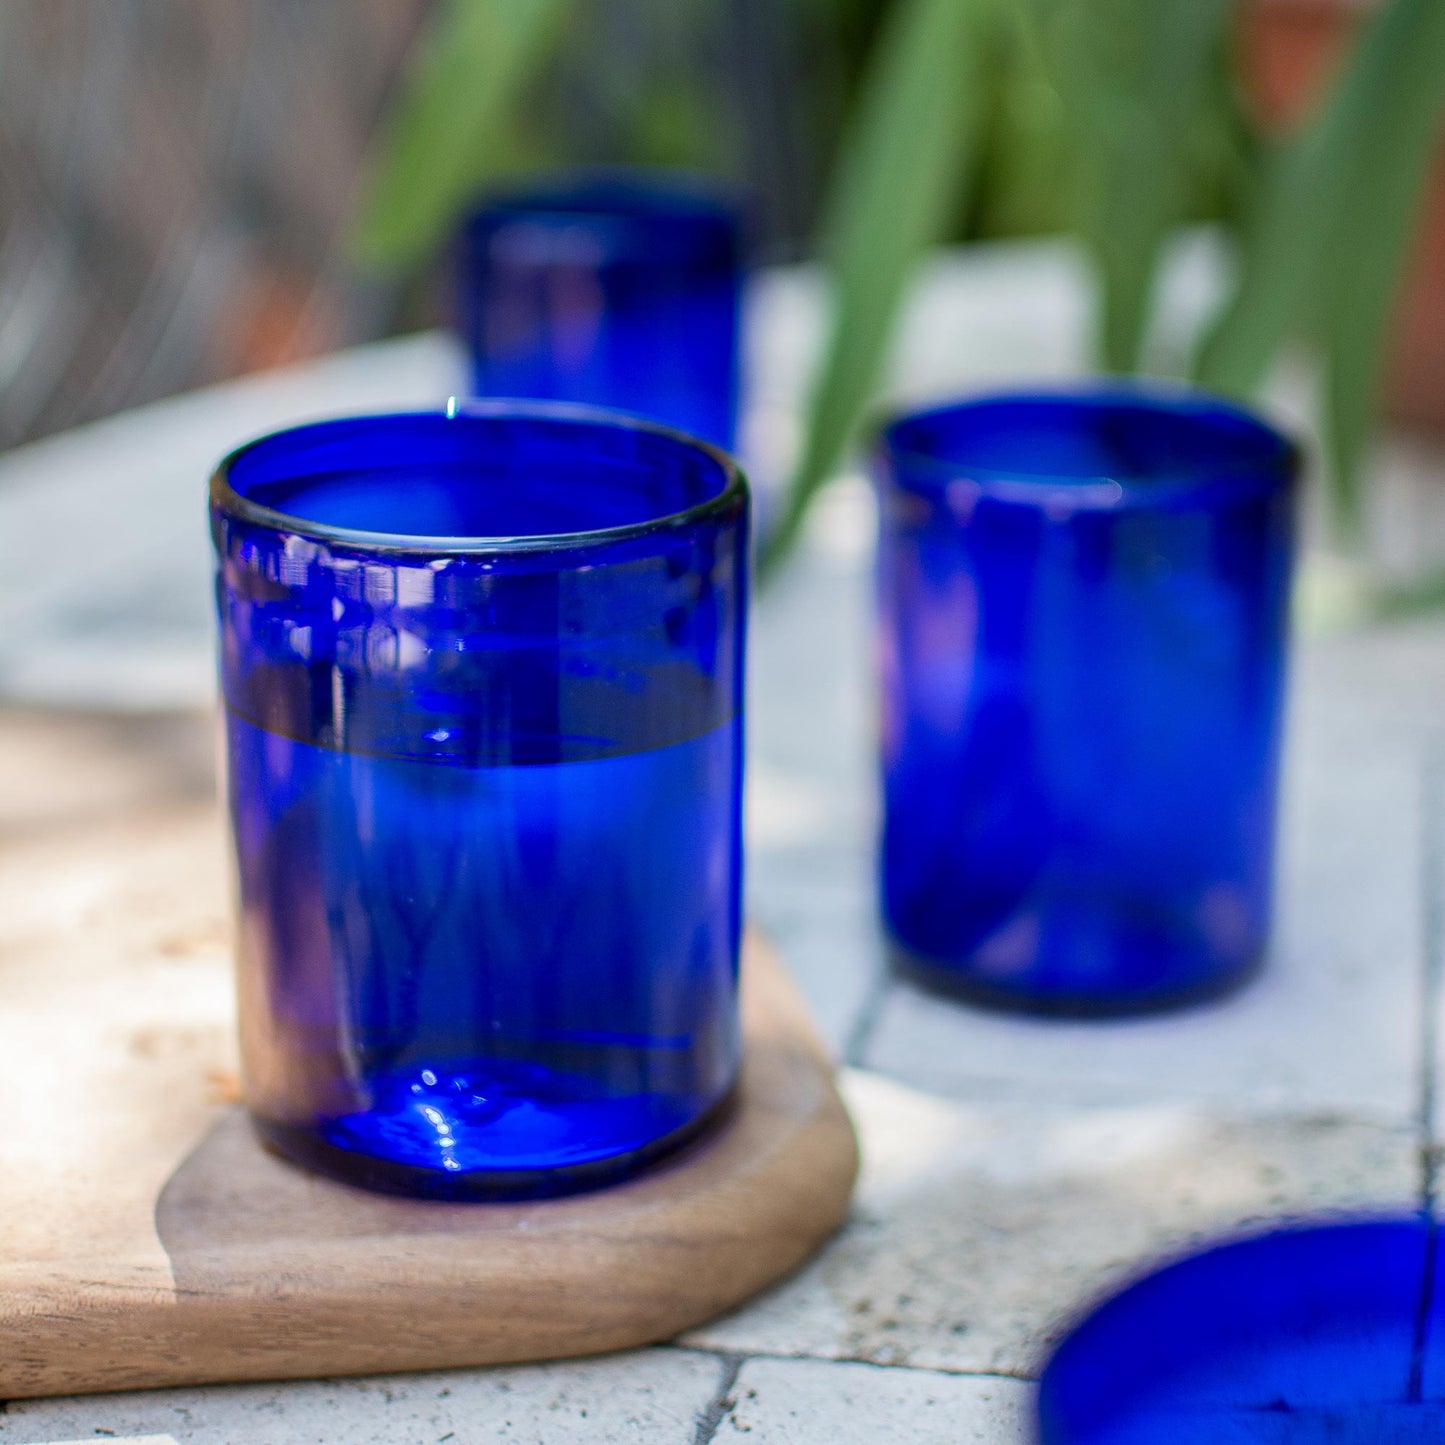 Pure Cobalt Blue Hand Blown Glass Tumblers Set of 6 Mexico